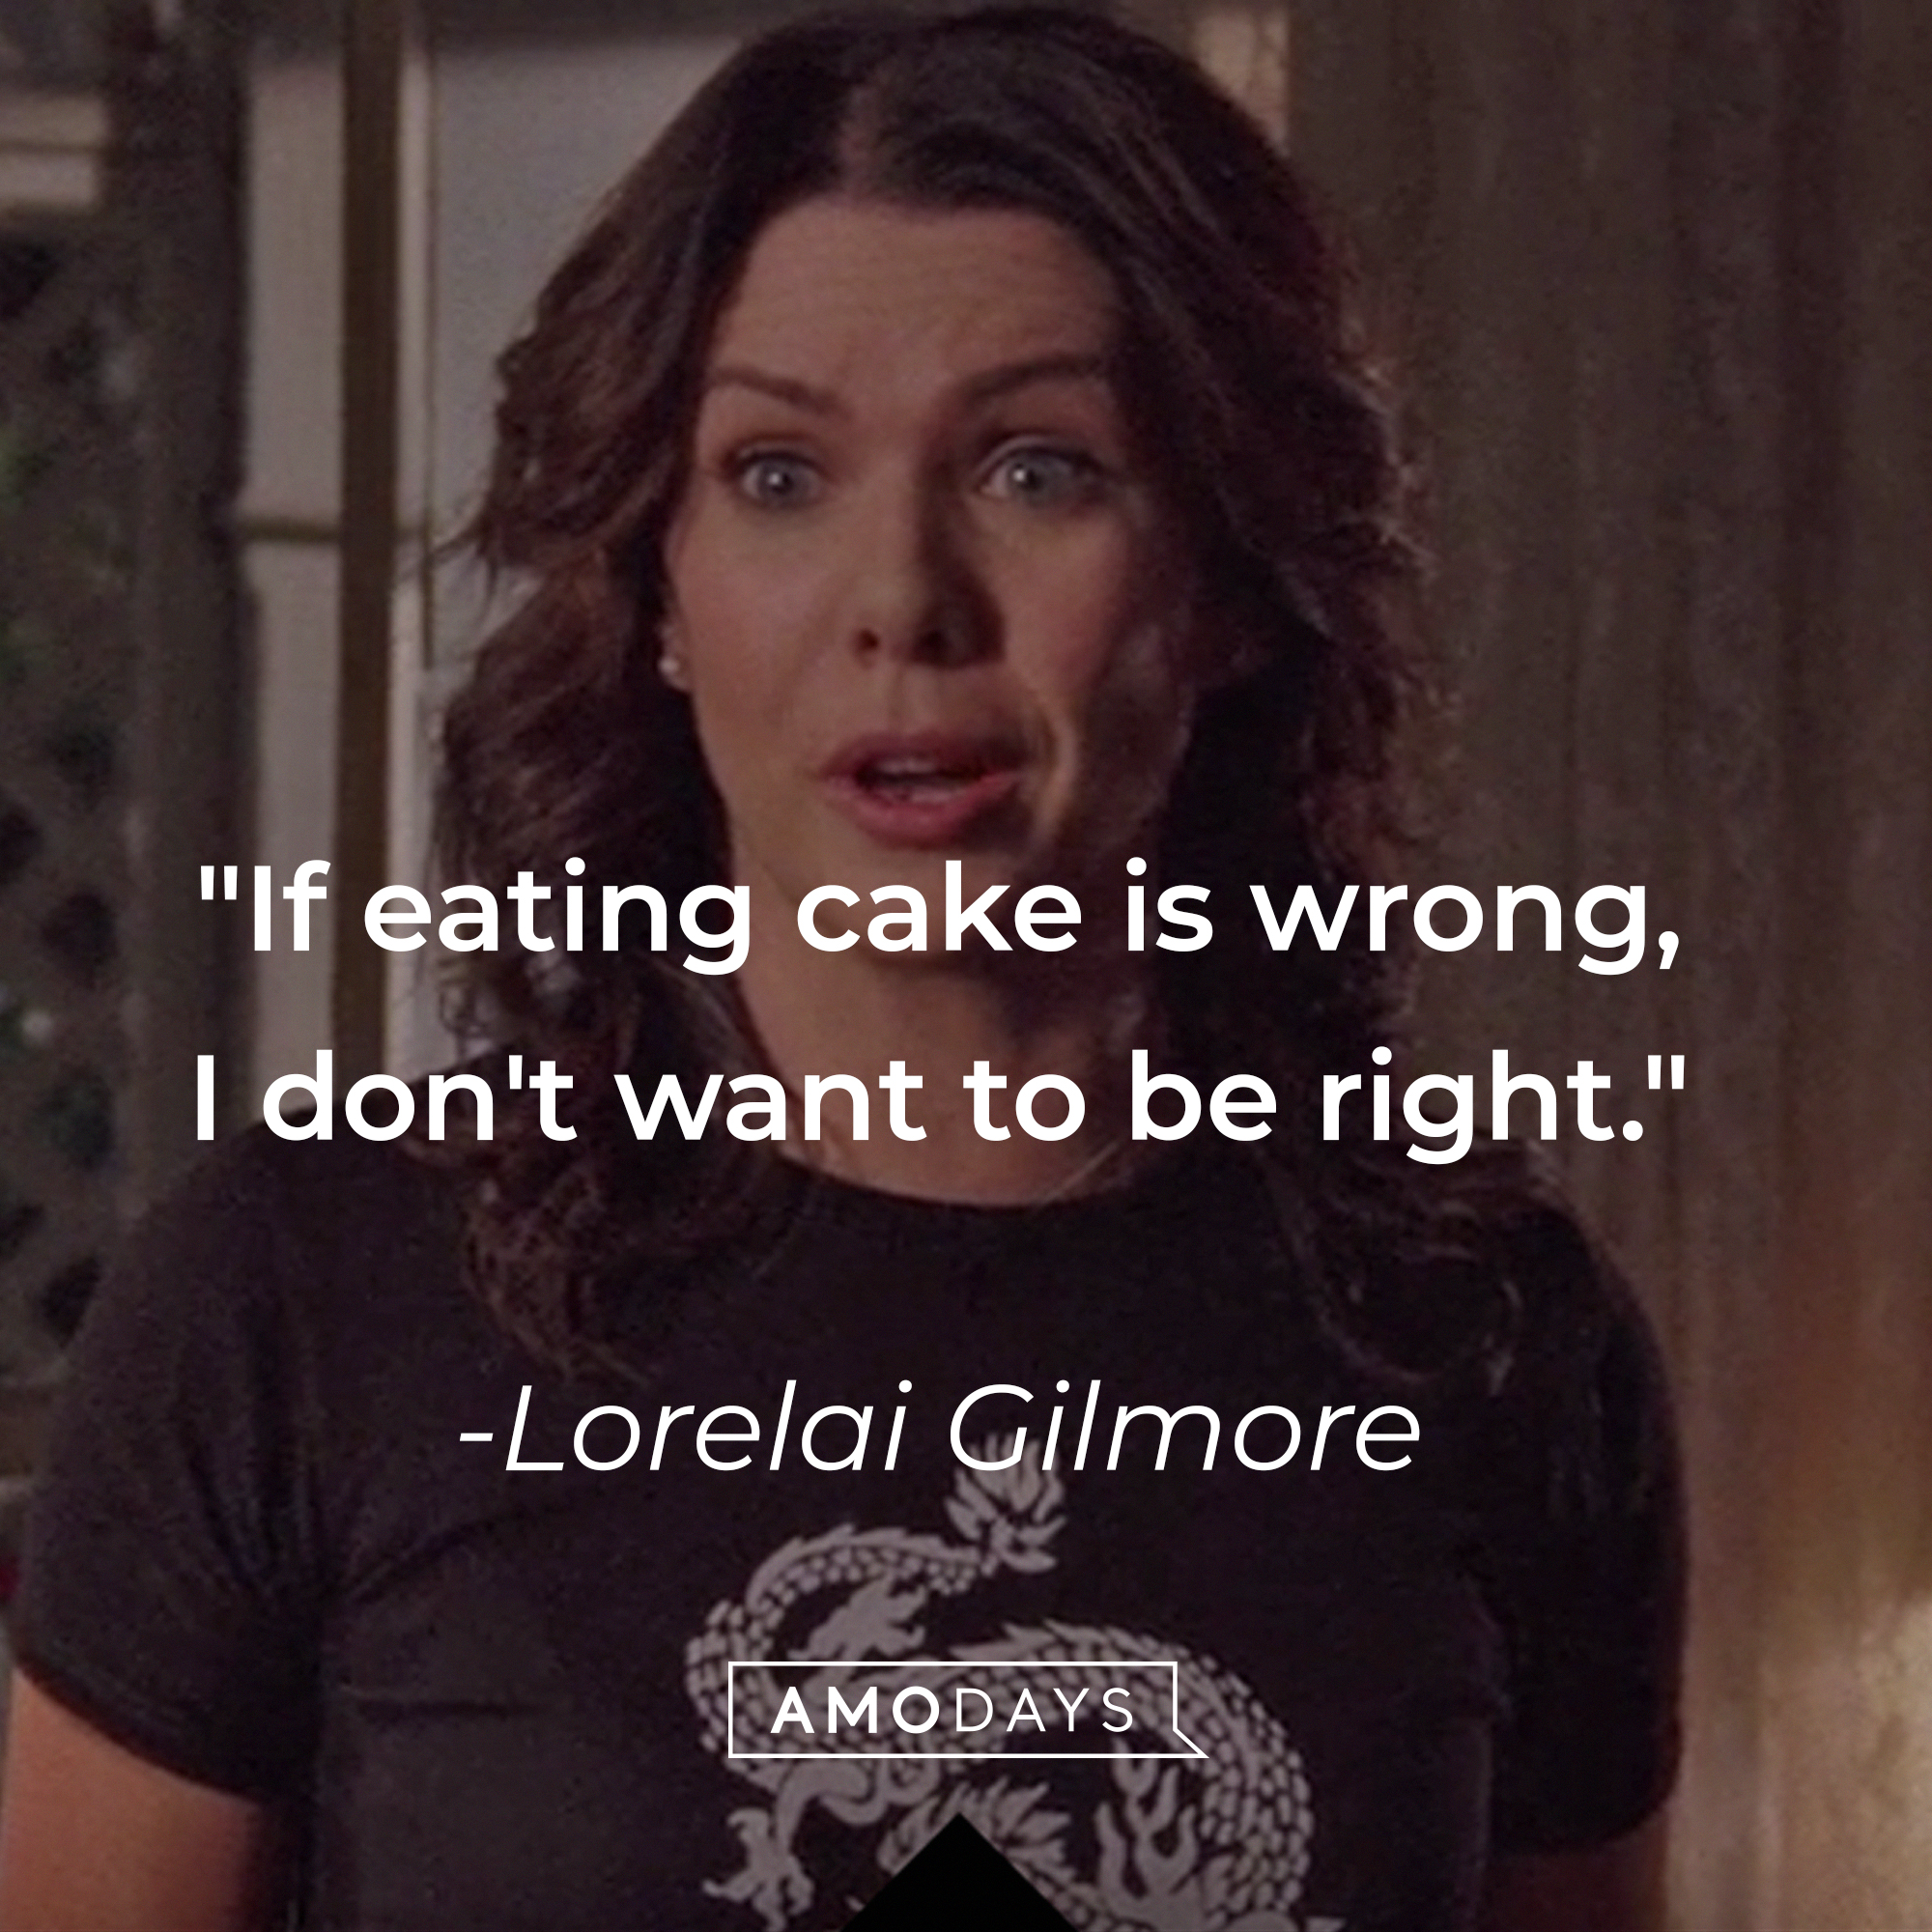 Lorelai Gilmore's quote: "If eating cake is wrong, I don't want to be right." | Source: Facebook/GilmoreGirls